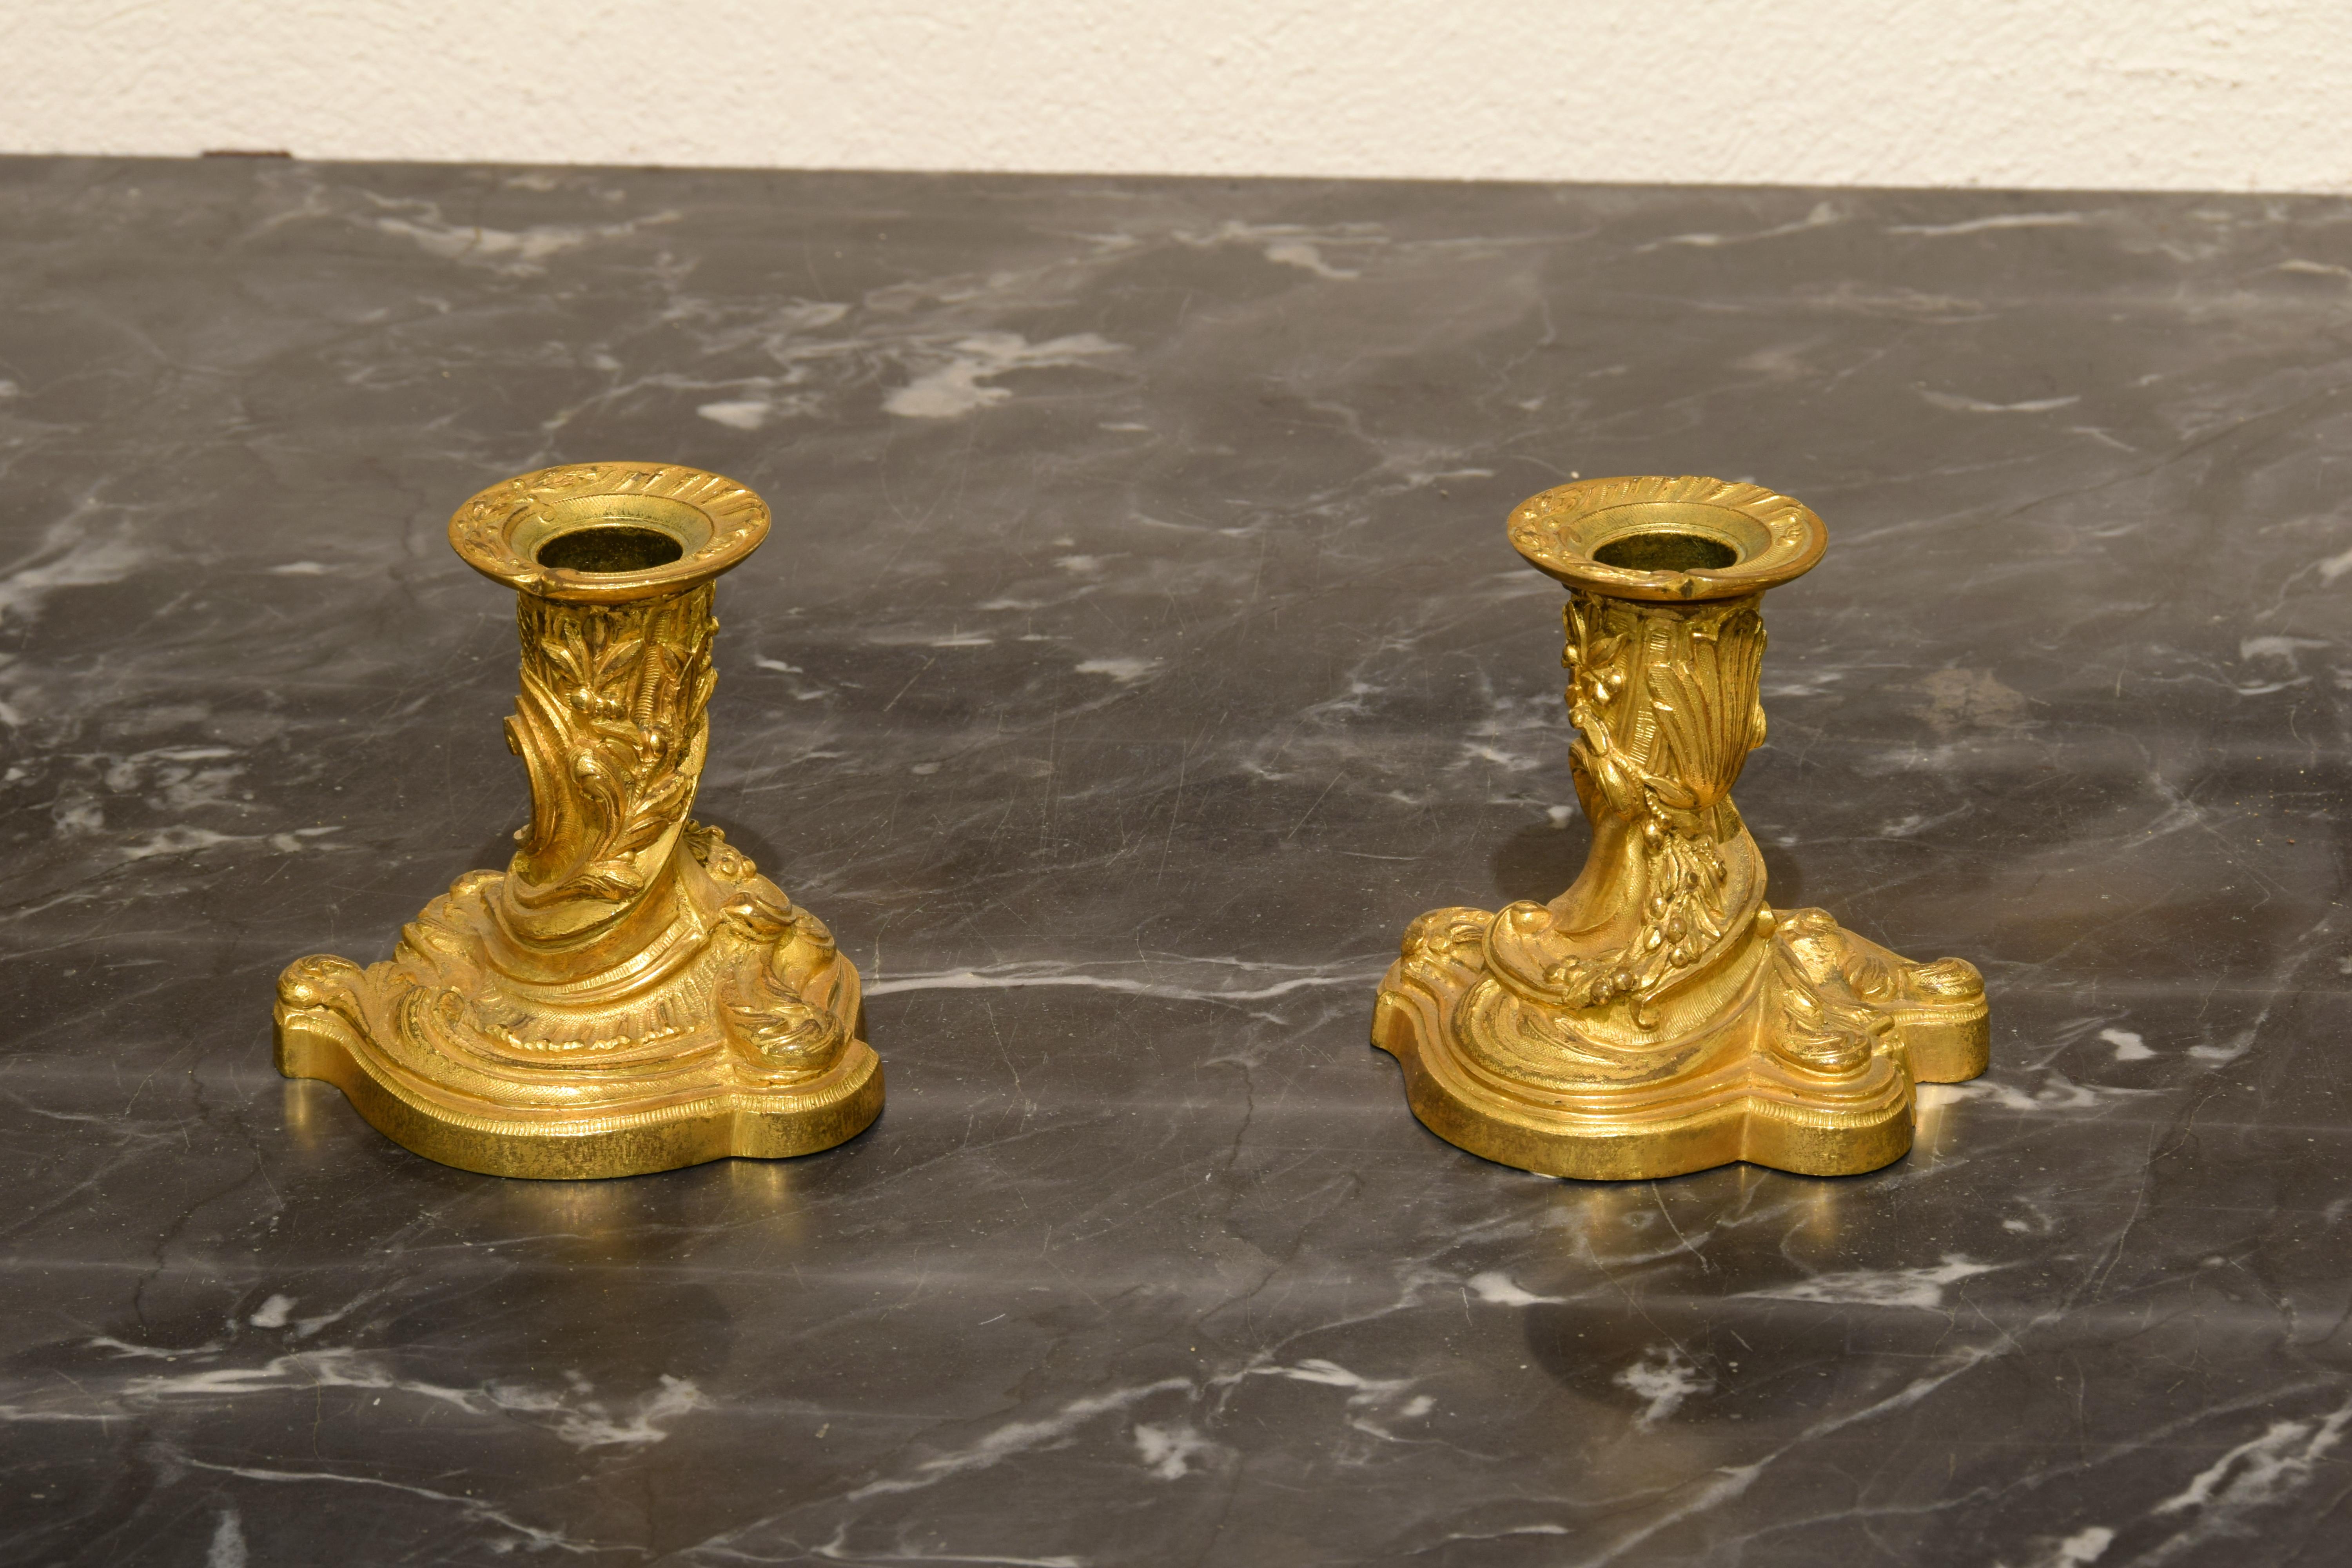  19th Century, Pair of French Gilt Bronze Candlesticks, Louis XV Style For Sale 13